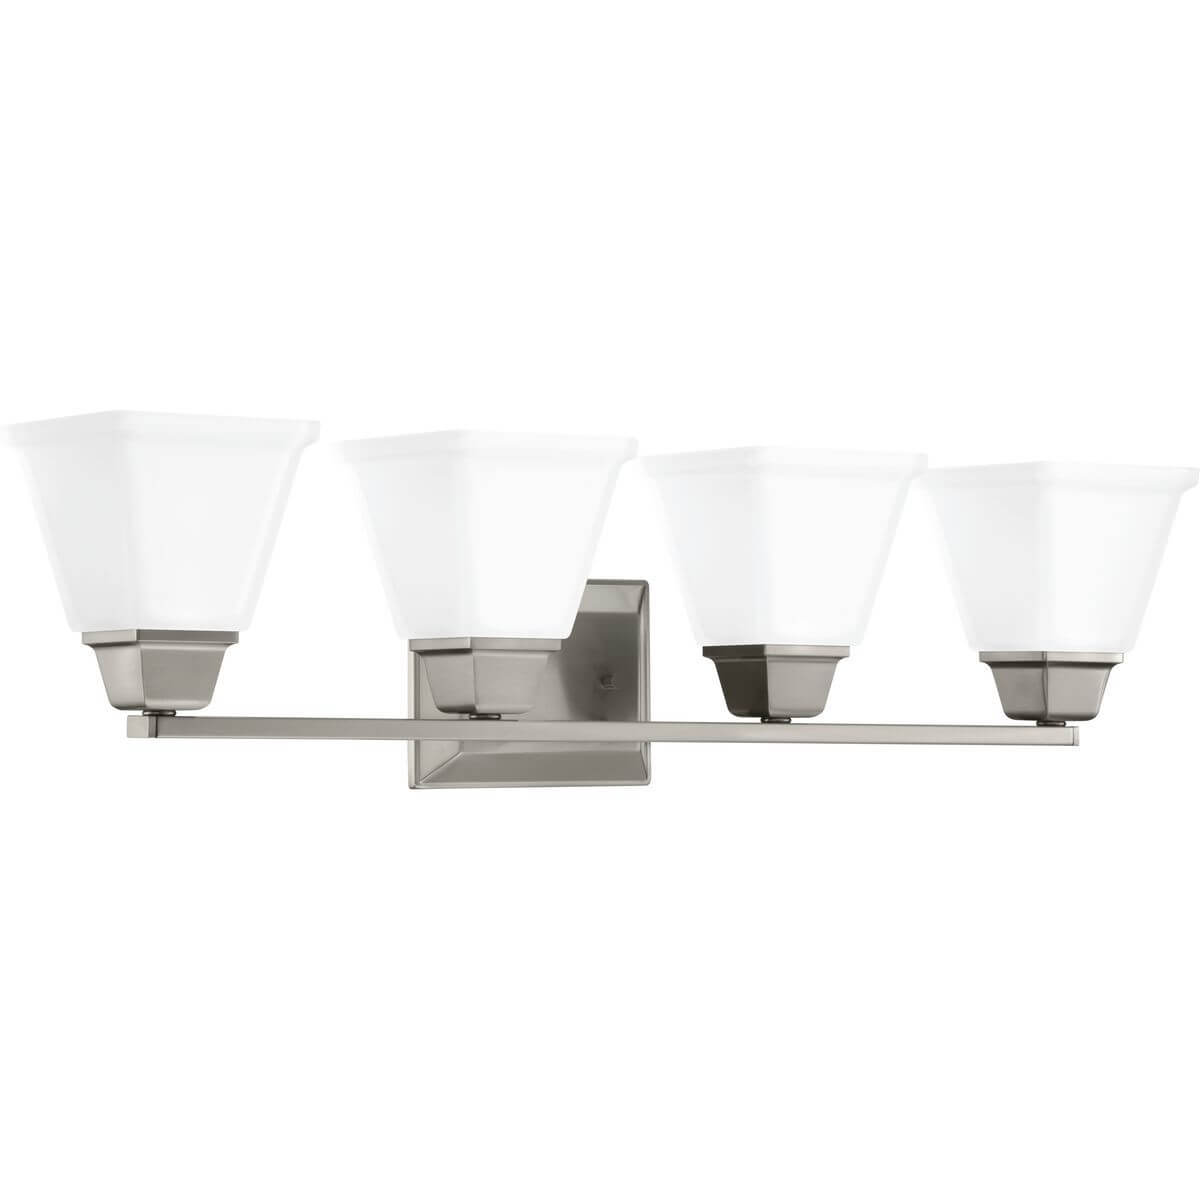 Progress Lighting Clifton Heights 4 Light 32 inch Bath Vanity Light in Brushed Nickel with Etched Glass P300161-009